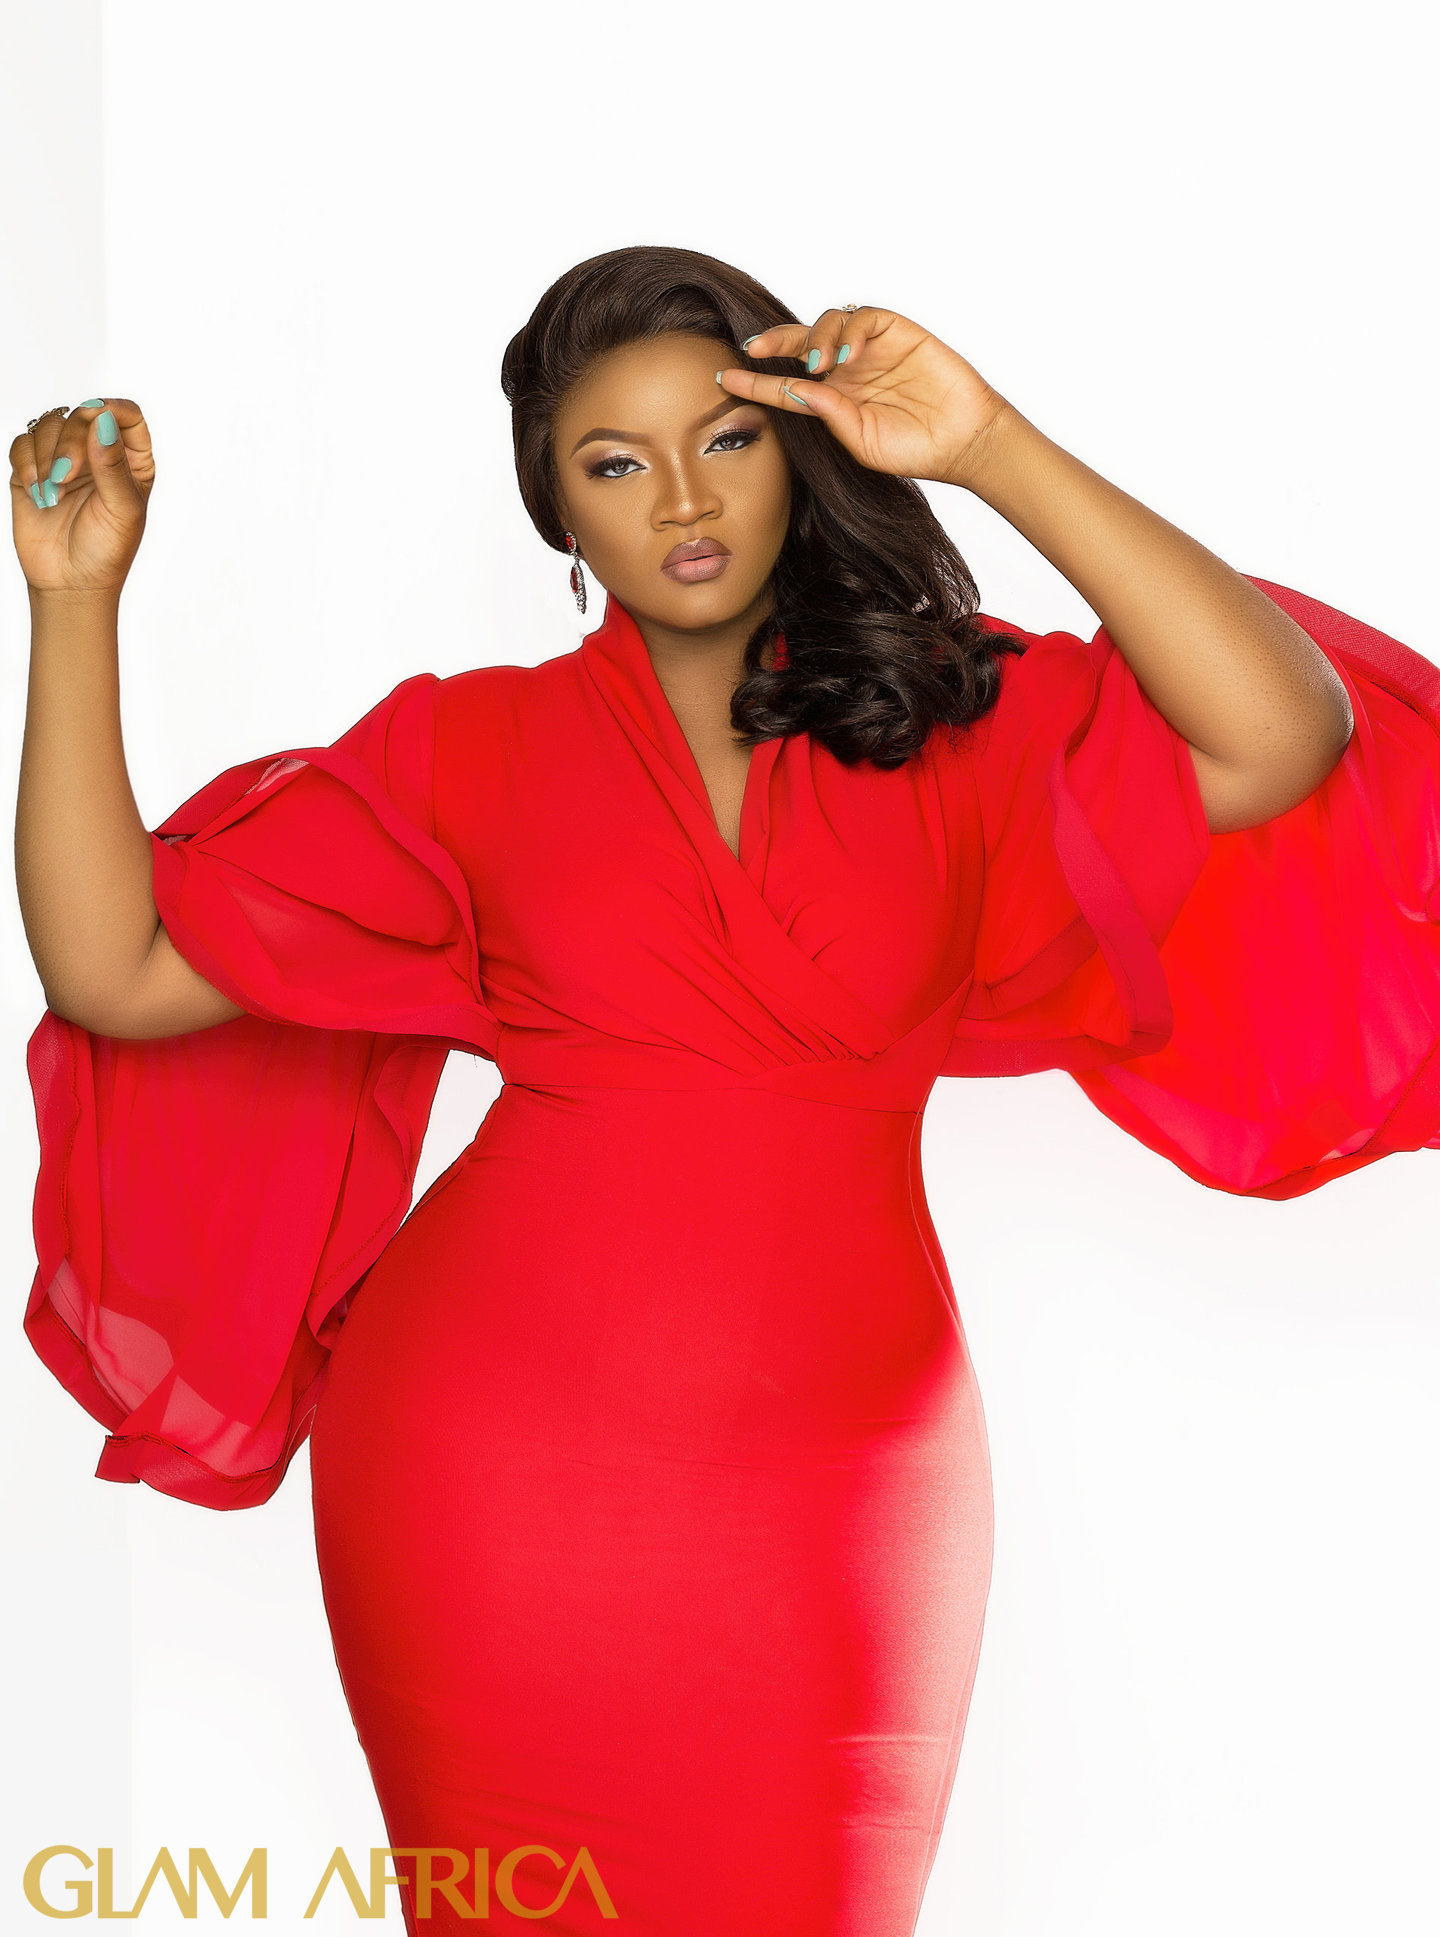 She is Called Omosexy for a Reason, Here are the Hot & Spicy Photos from